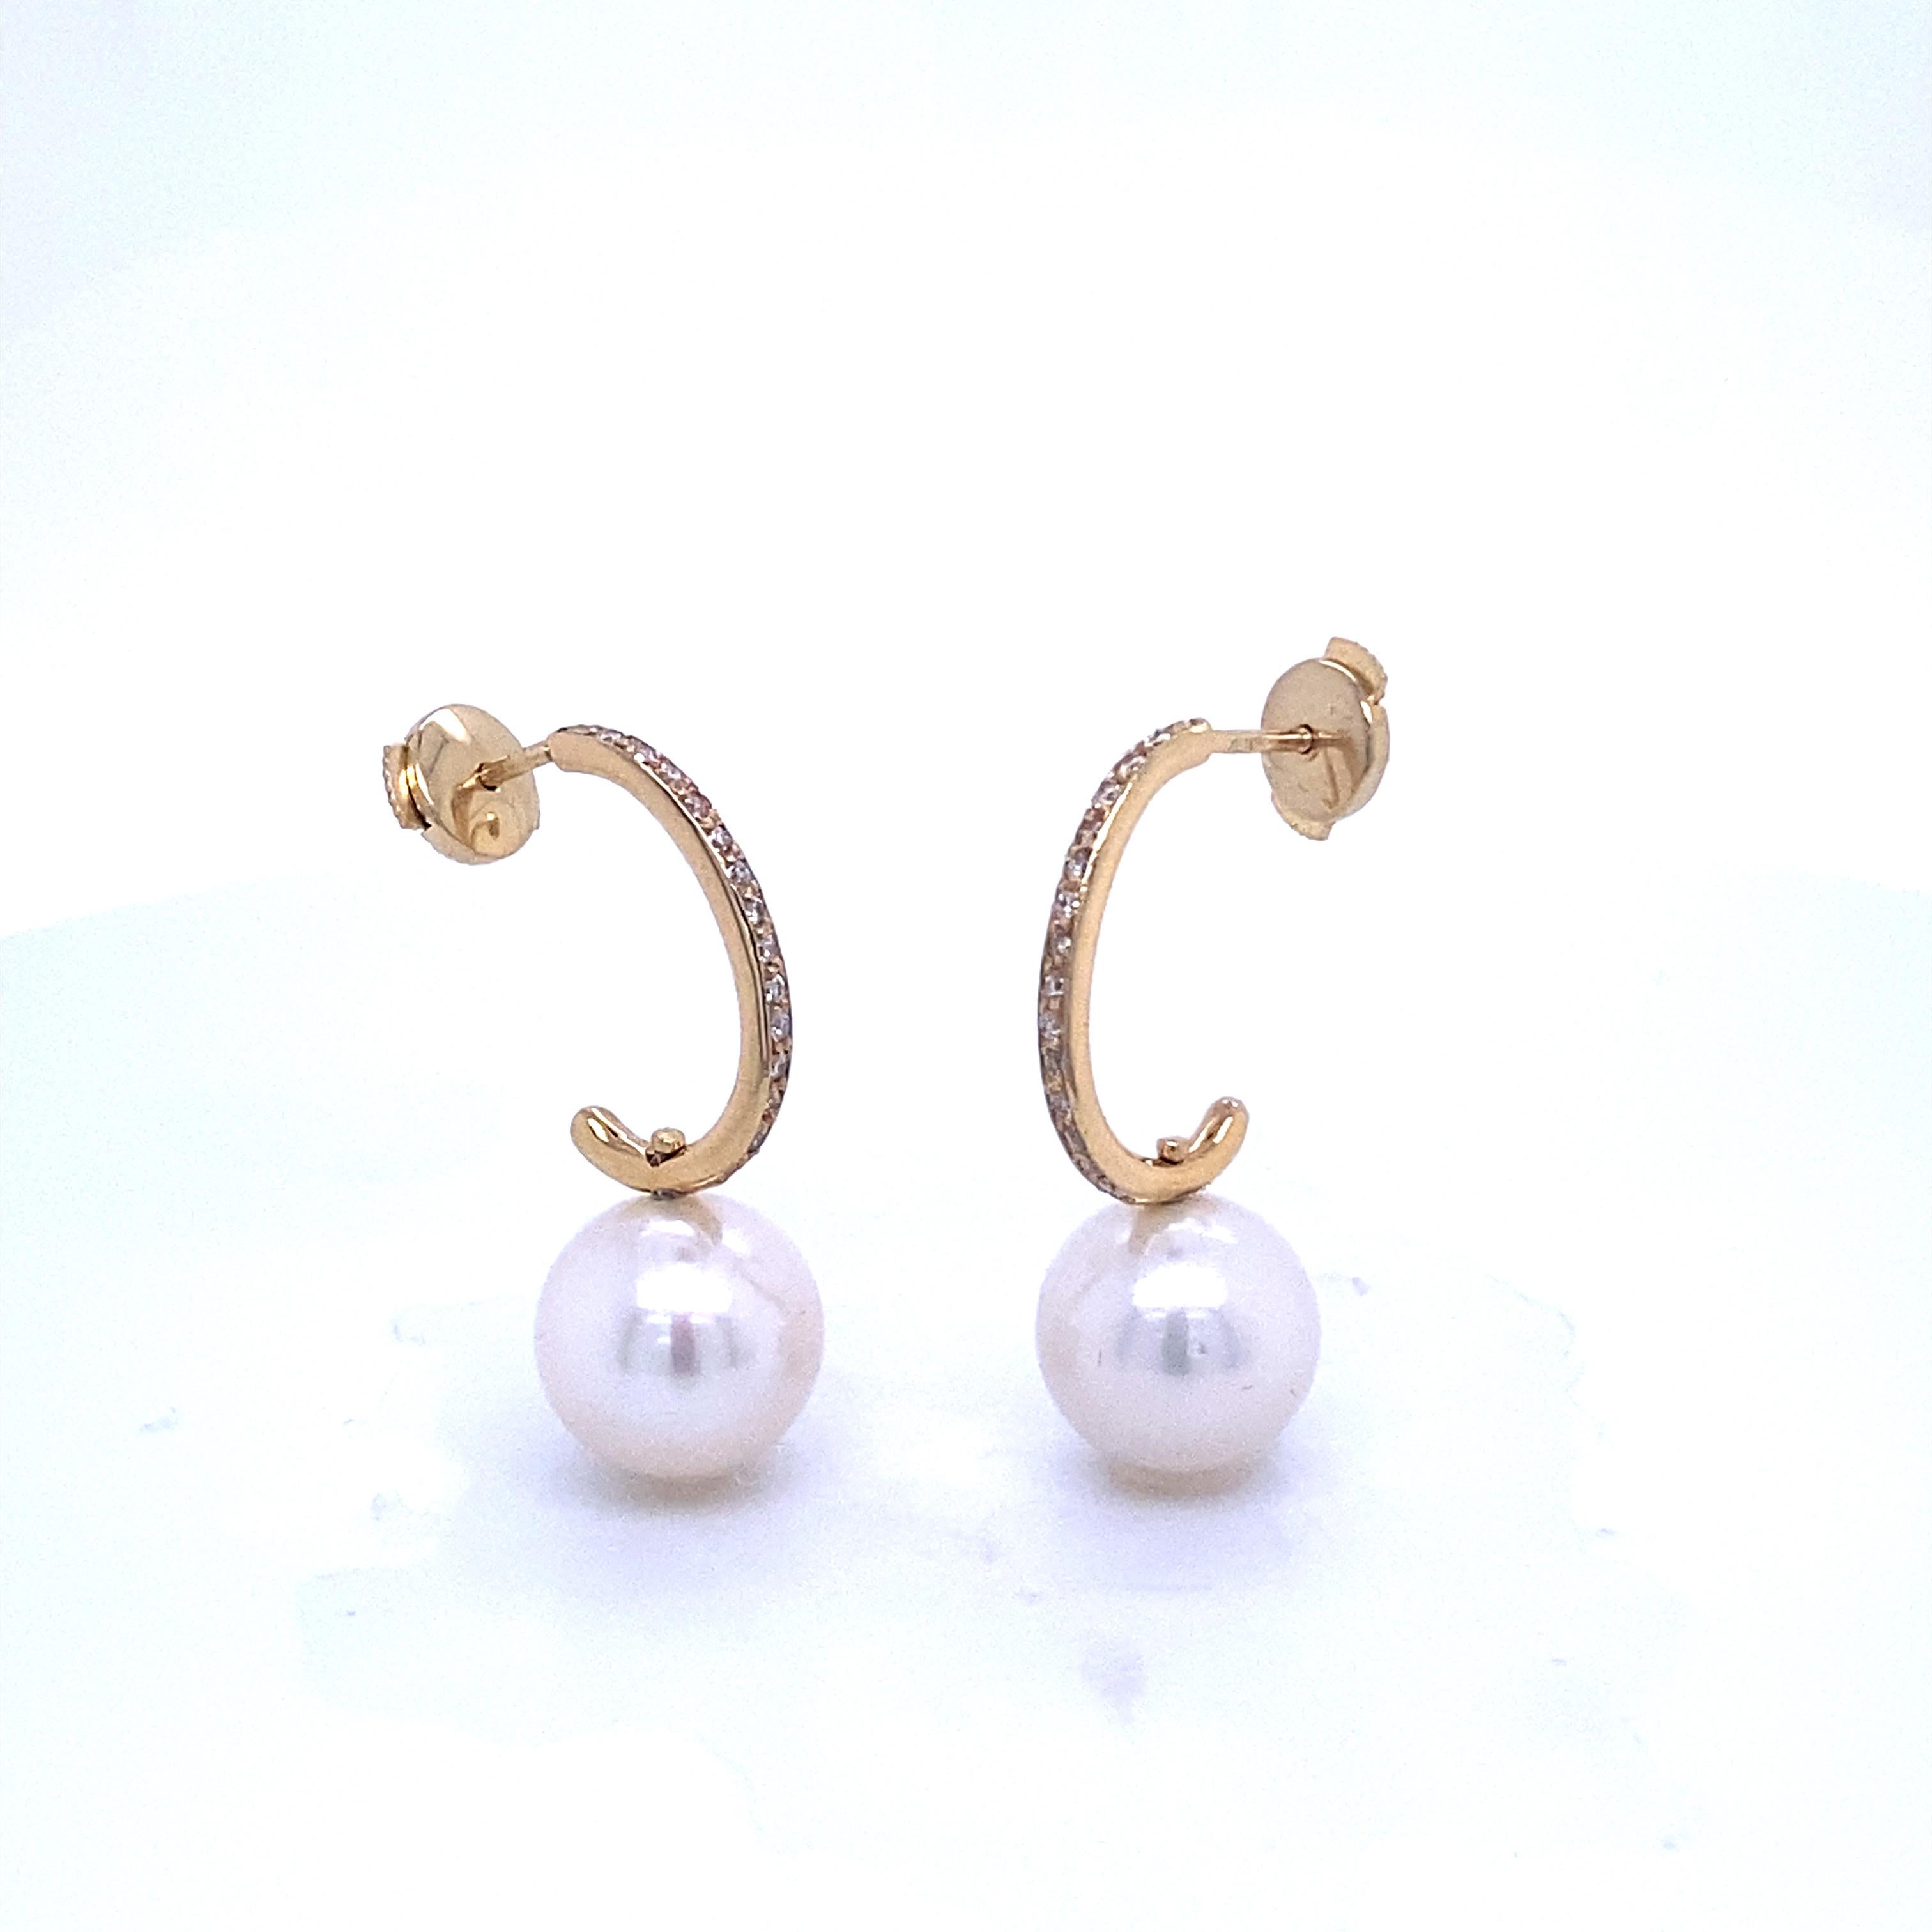 Discover these magnificent yellow gold earrings from the French collection of Mesure et Art du Temps. These earrings are a true fusion of beauty and elegance, harmoniously combining cultured pearls and diamonds.

The cultured pearls, measuring